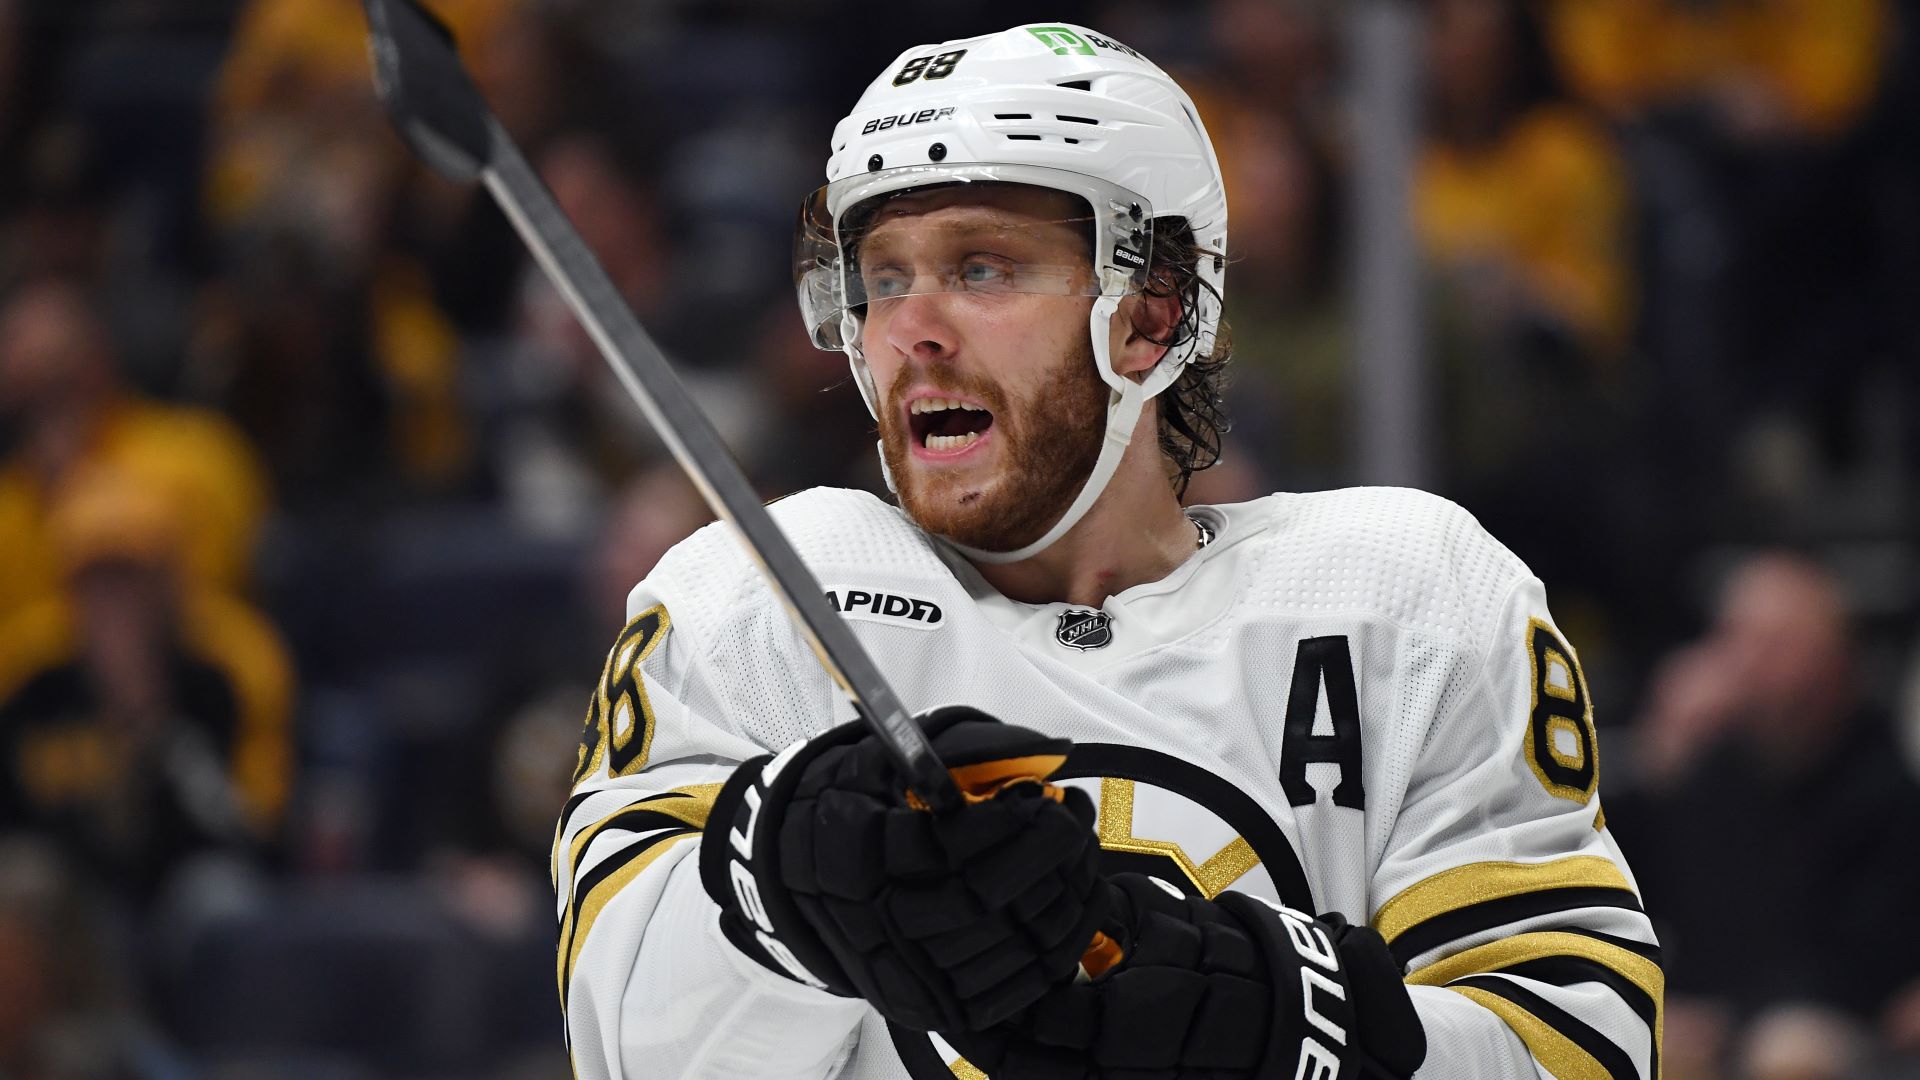 What Added To David Pastrnak’s Frustration About Game 4 Controversy